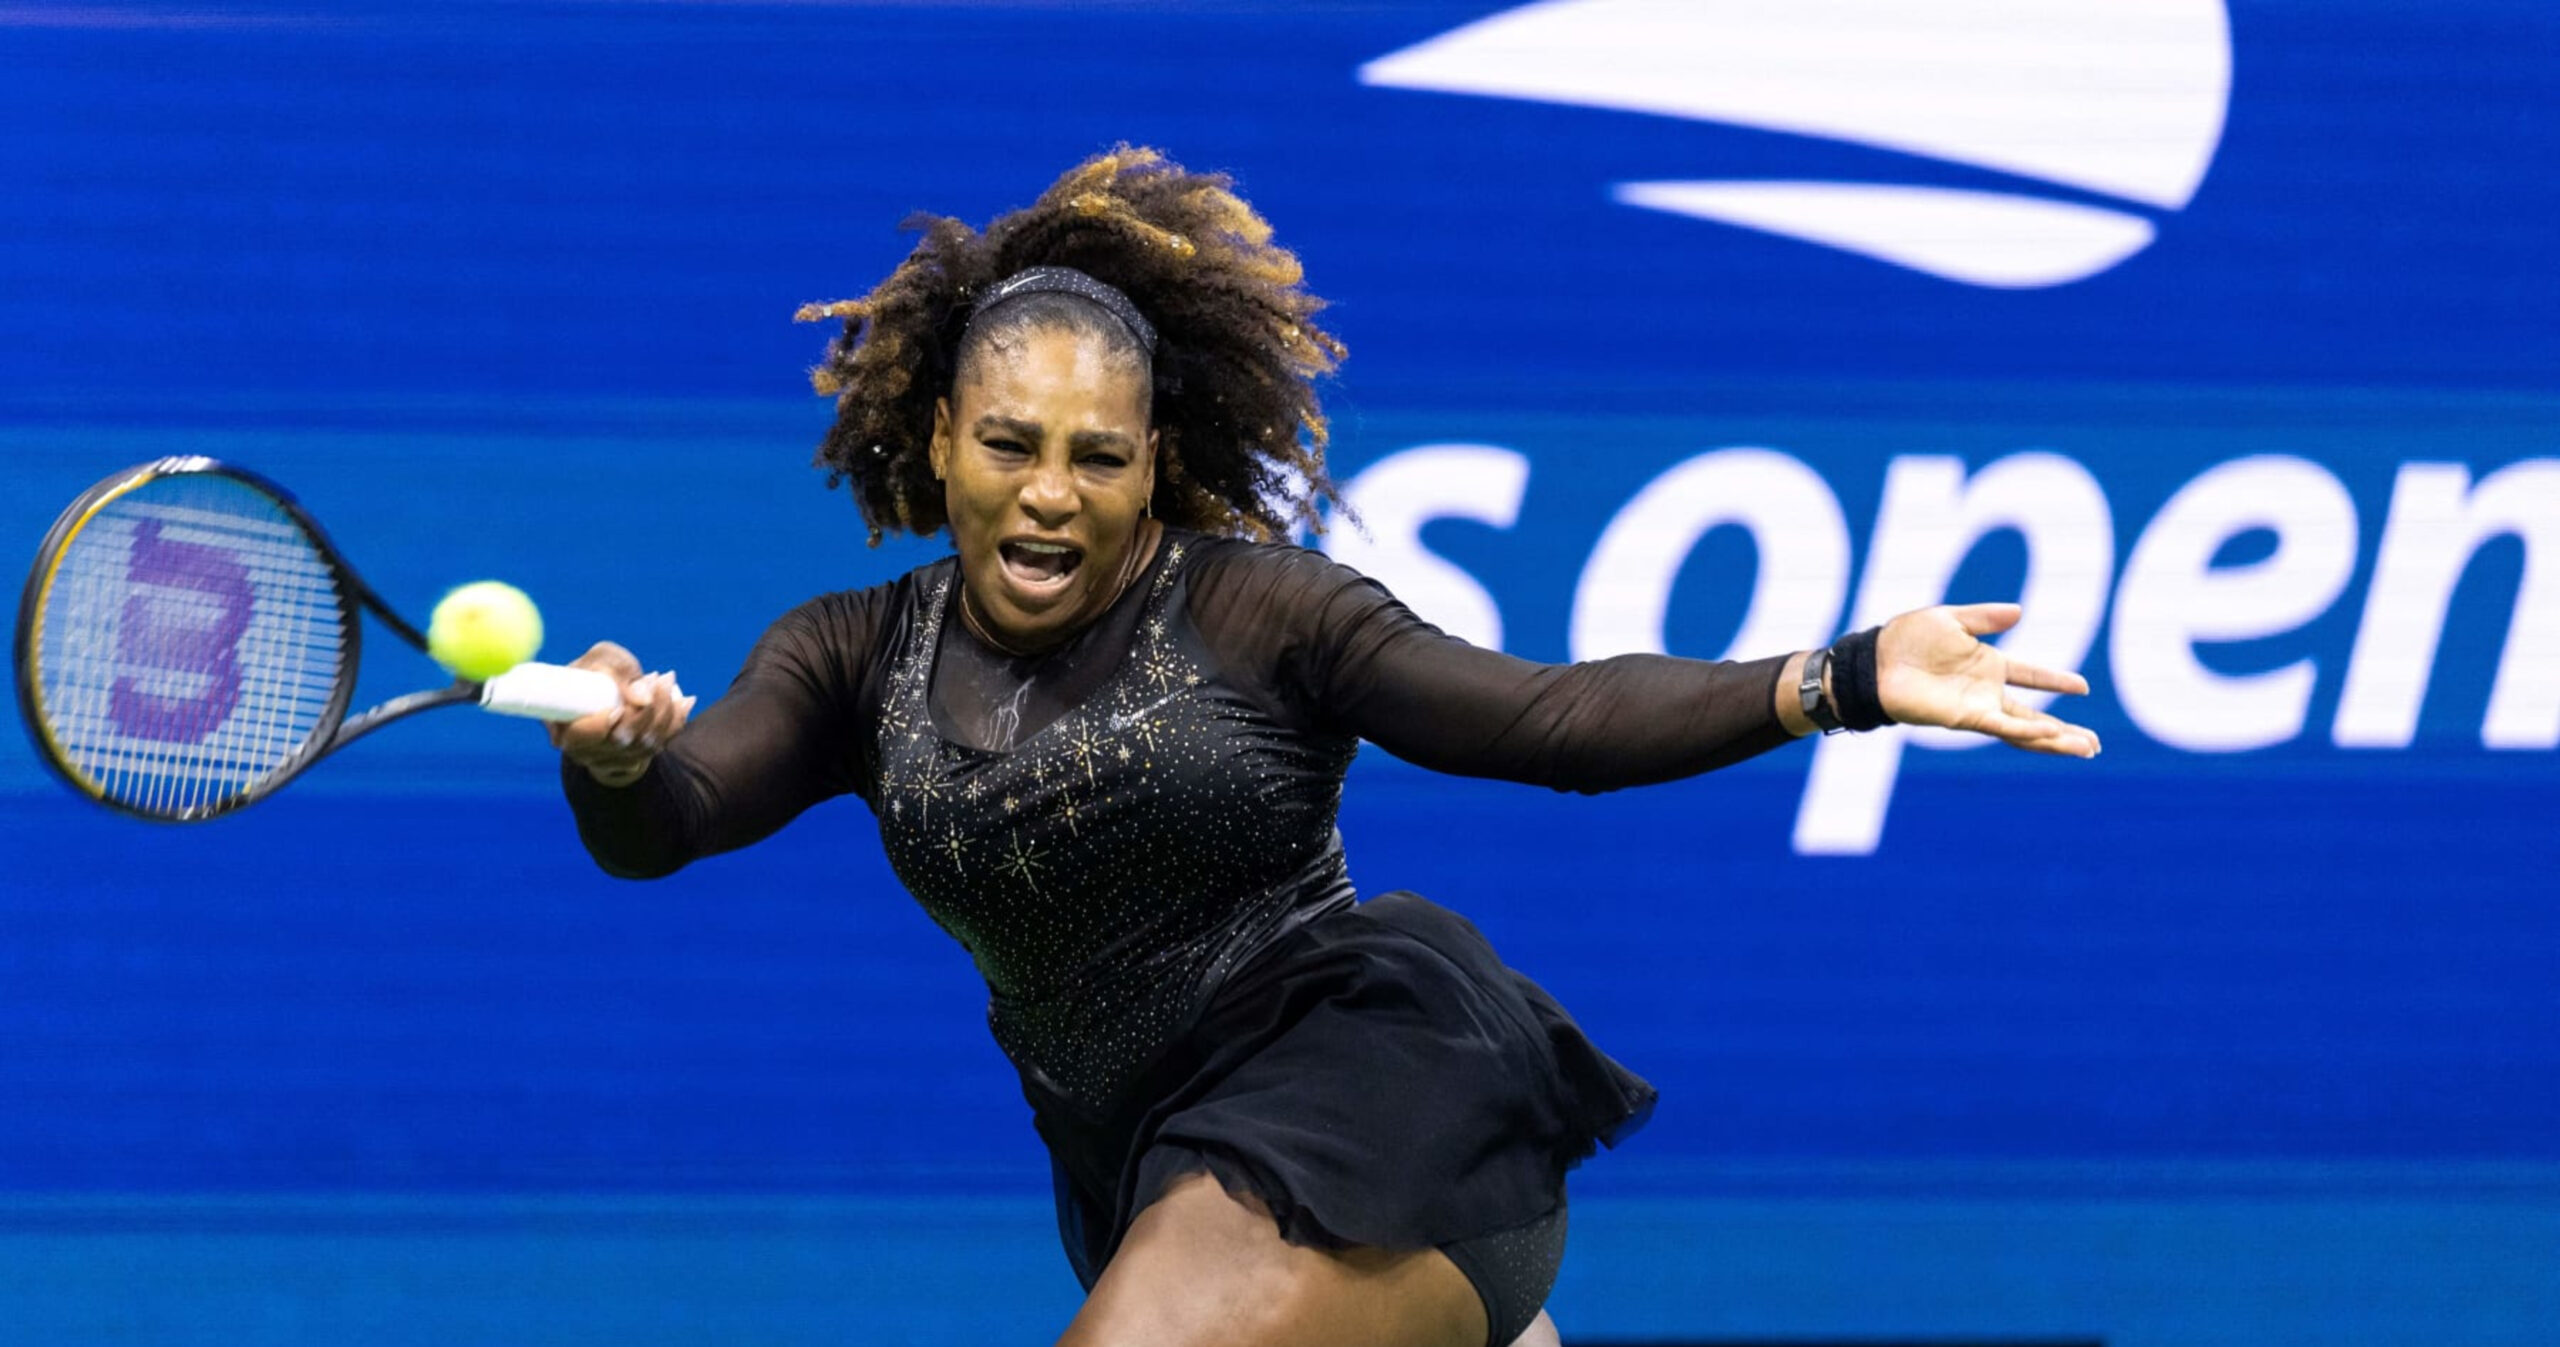 Serena Williams on Potential Return to Tennis After US Open Loss: ‘You Never Know’